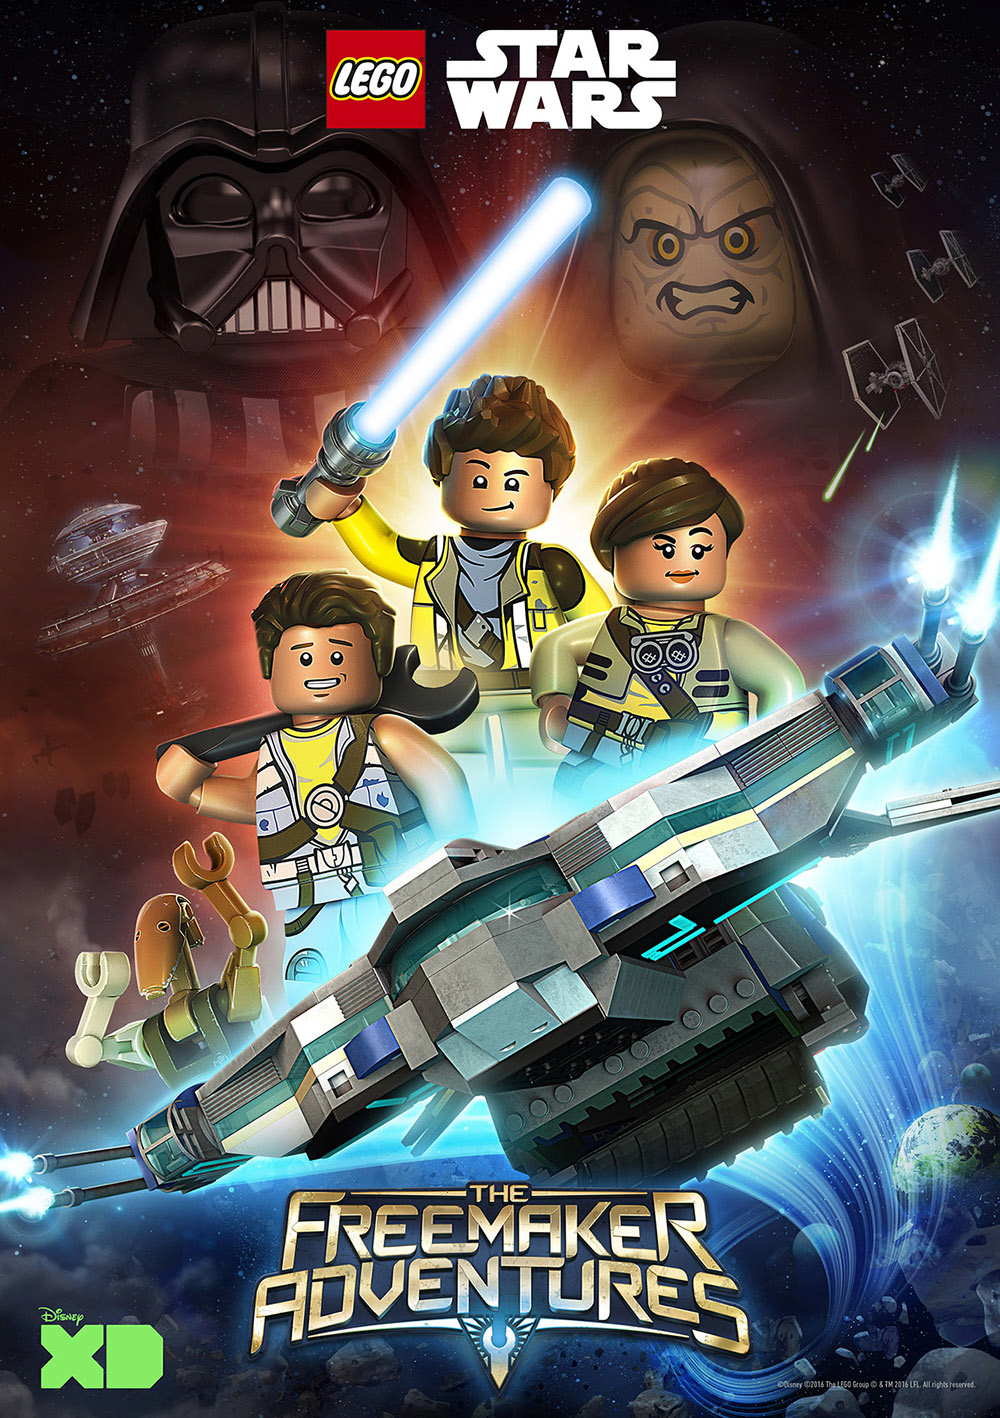 http://vignette1.wikia.nocookie.net/starwars/images/6/61/LEGO_Star_Wars_The_Freemaker_Adventures.png/revision/latest?cb=20160211191245